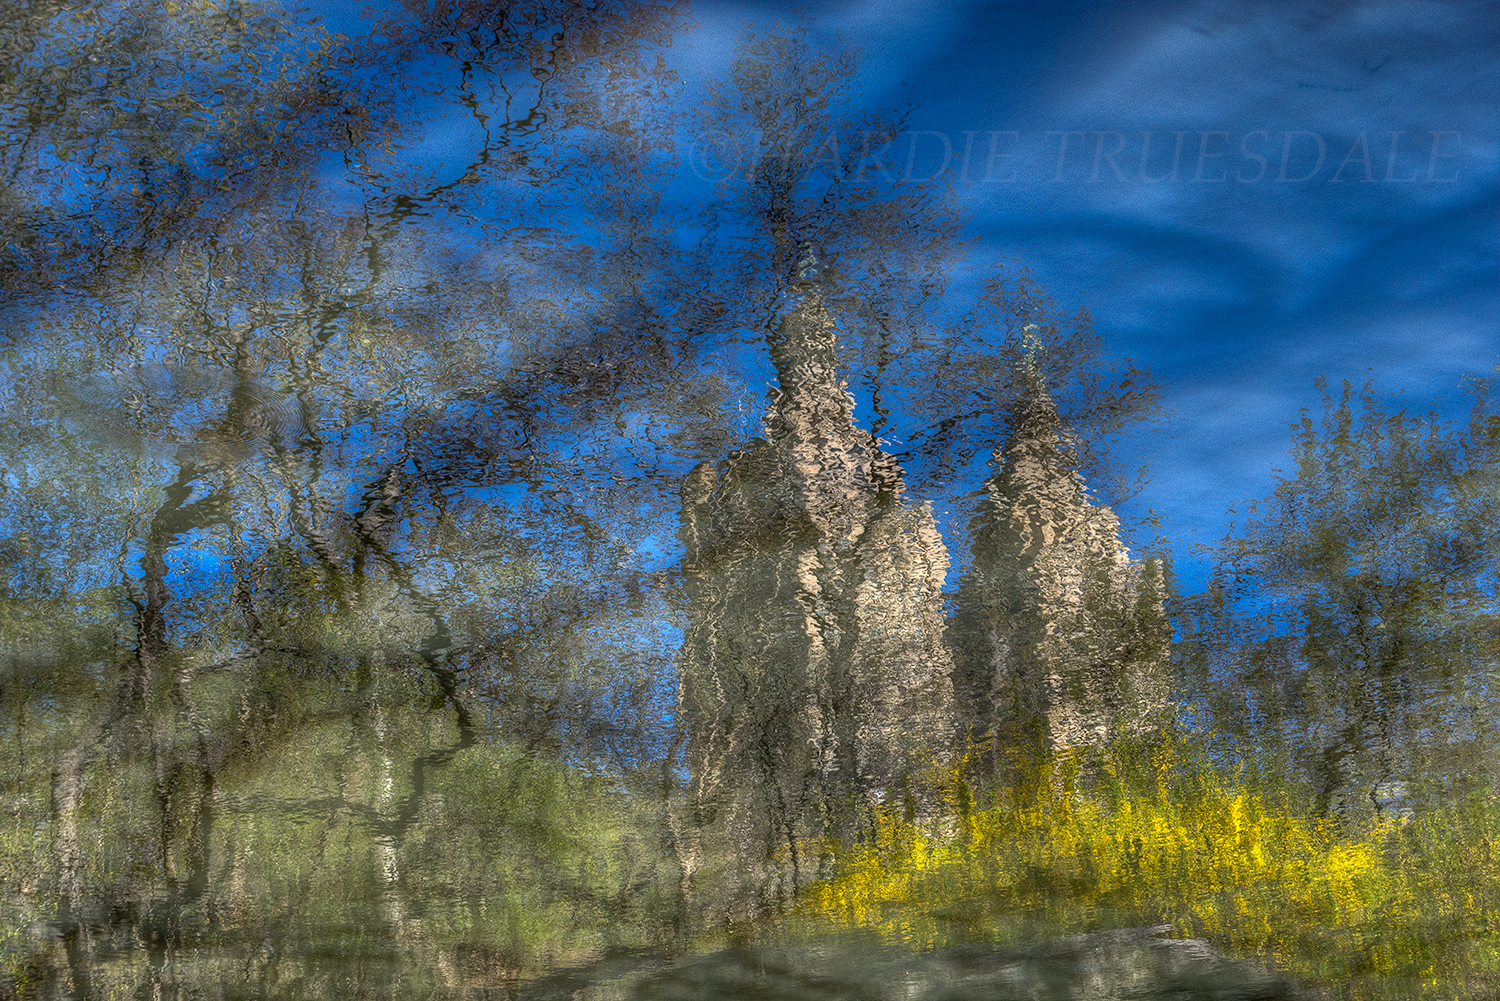  Nyc#79 "St Remo Reflections, Central Park" 